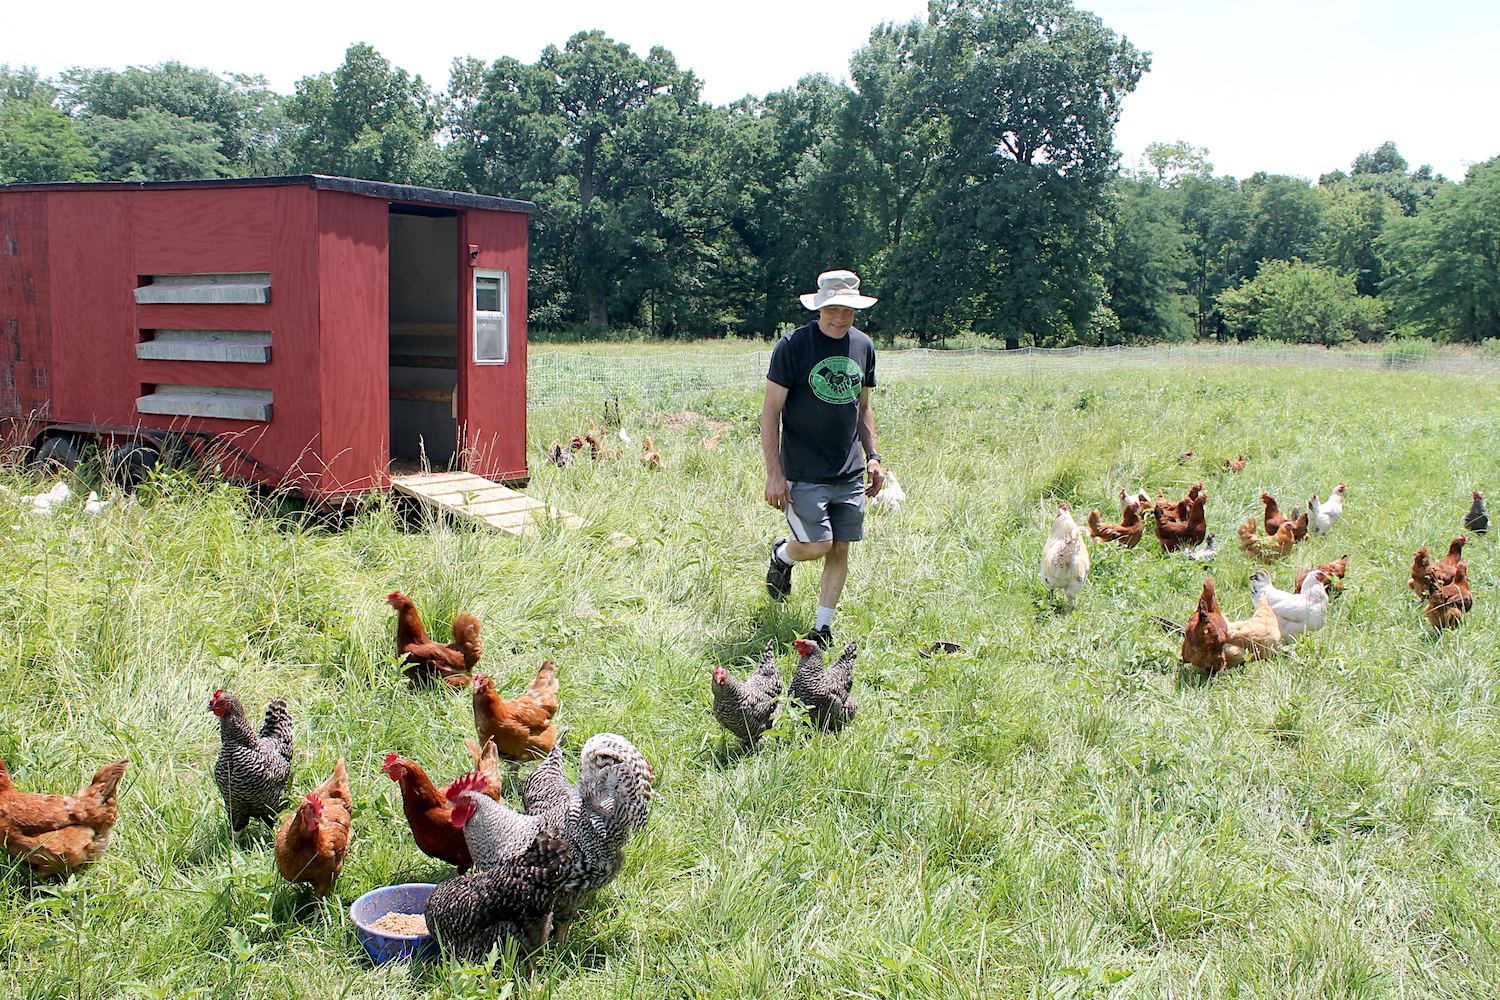 Mike and Chickens at Antiquity Oaks Farm